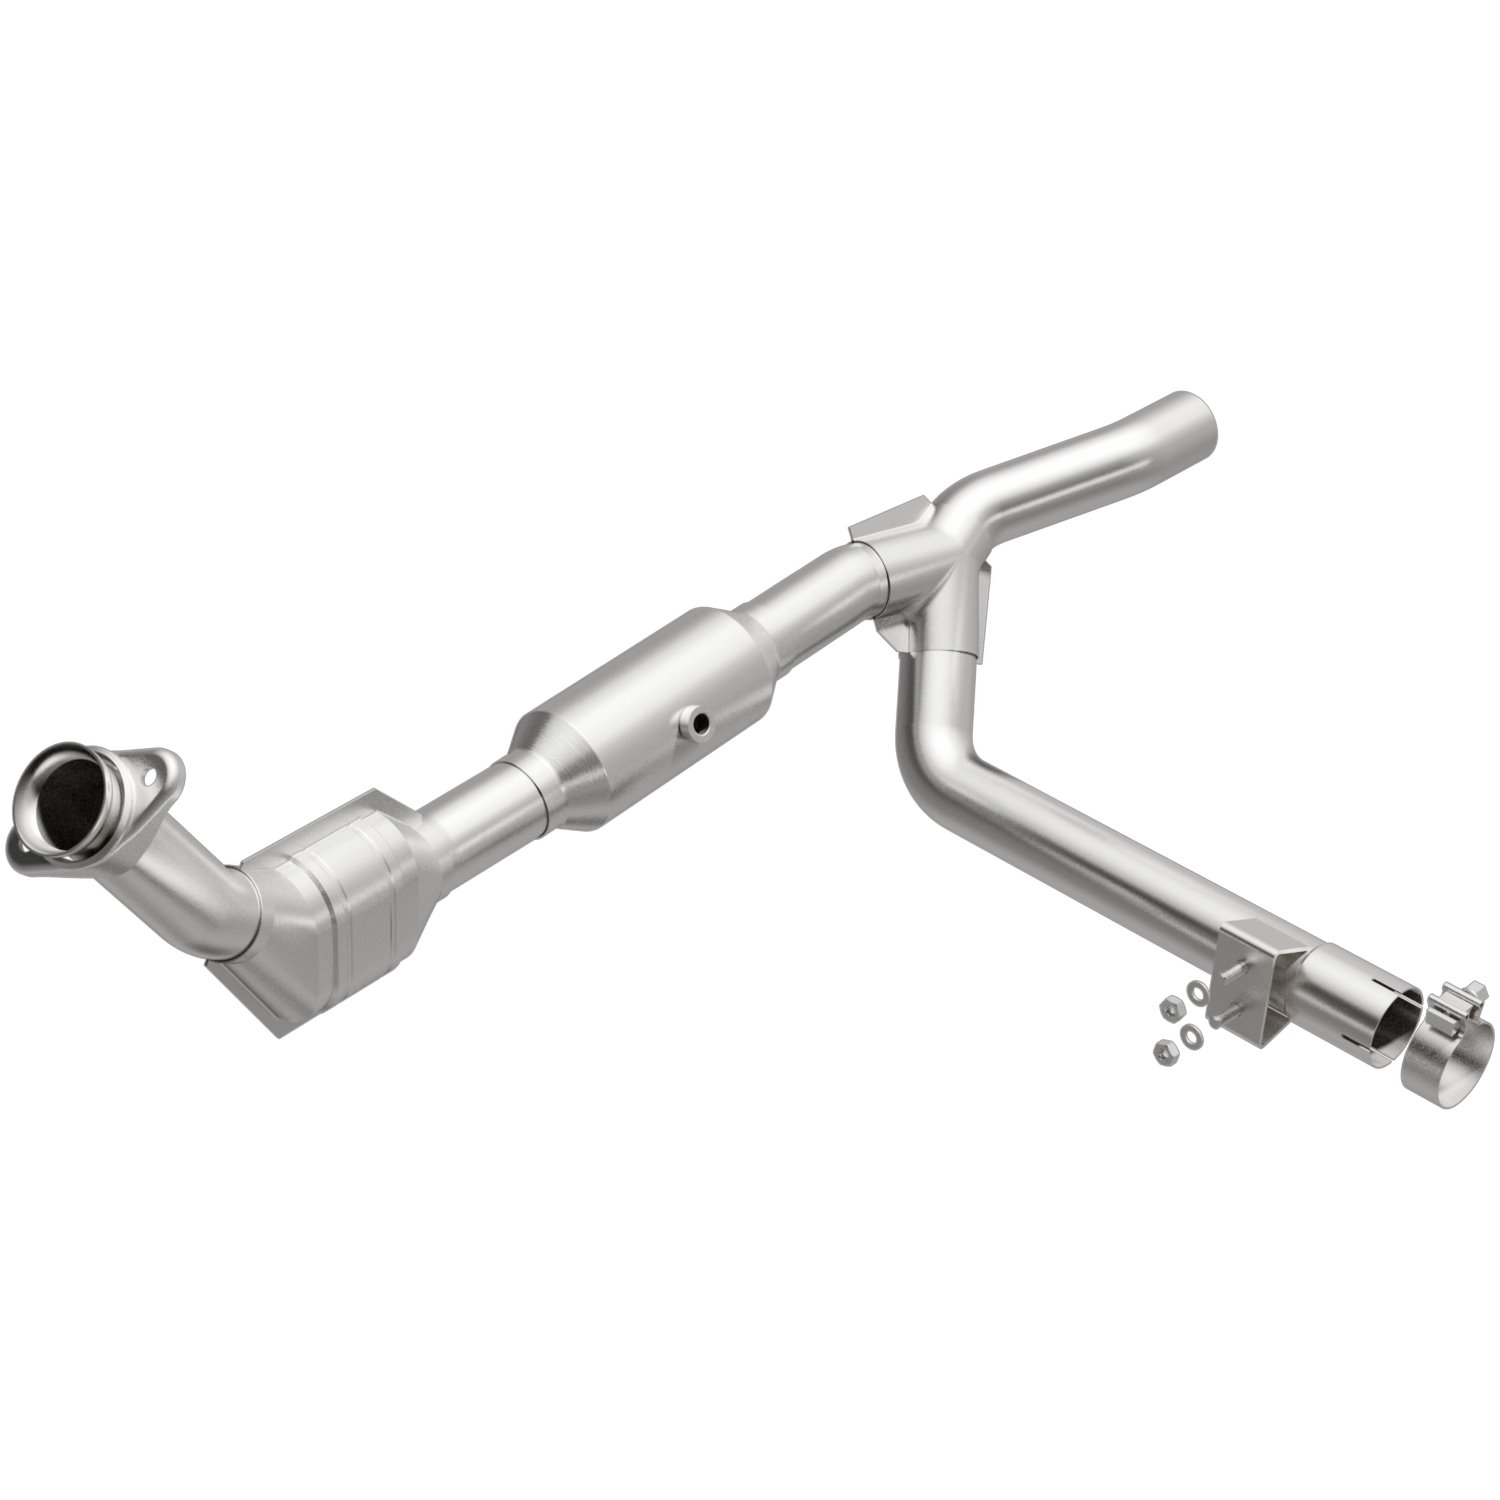 OEM Grade Federal / EPA Compliant Direct-Fit Catalytic Converter 21-249